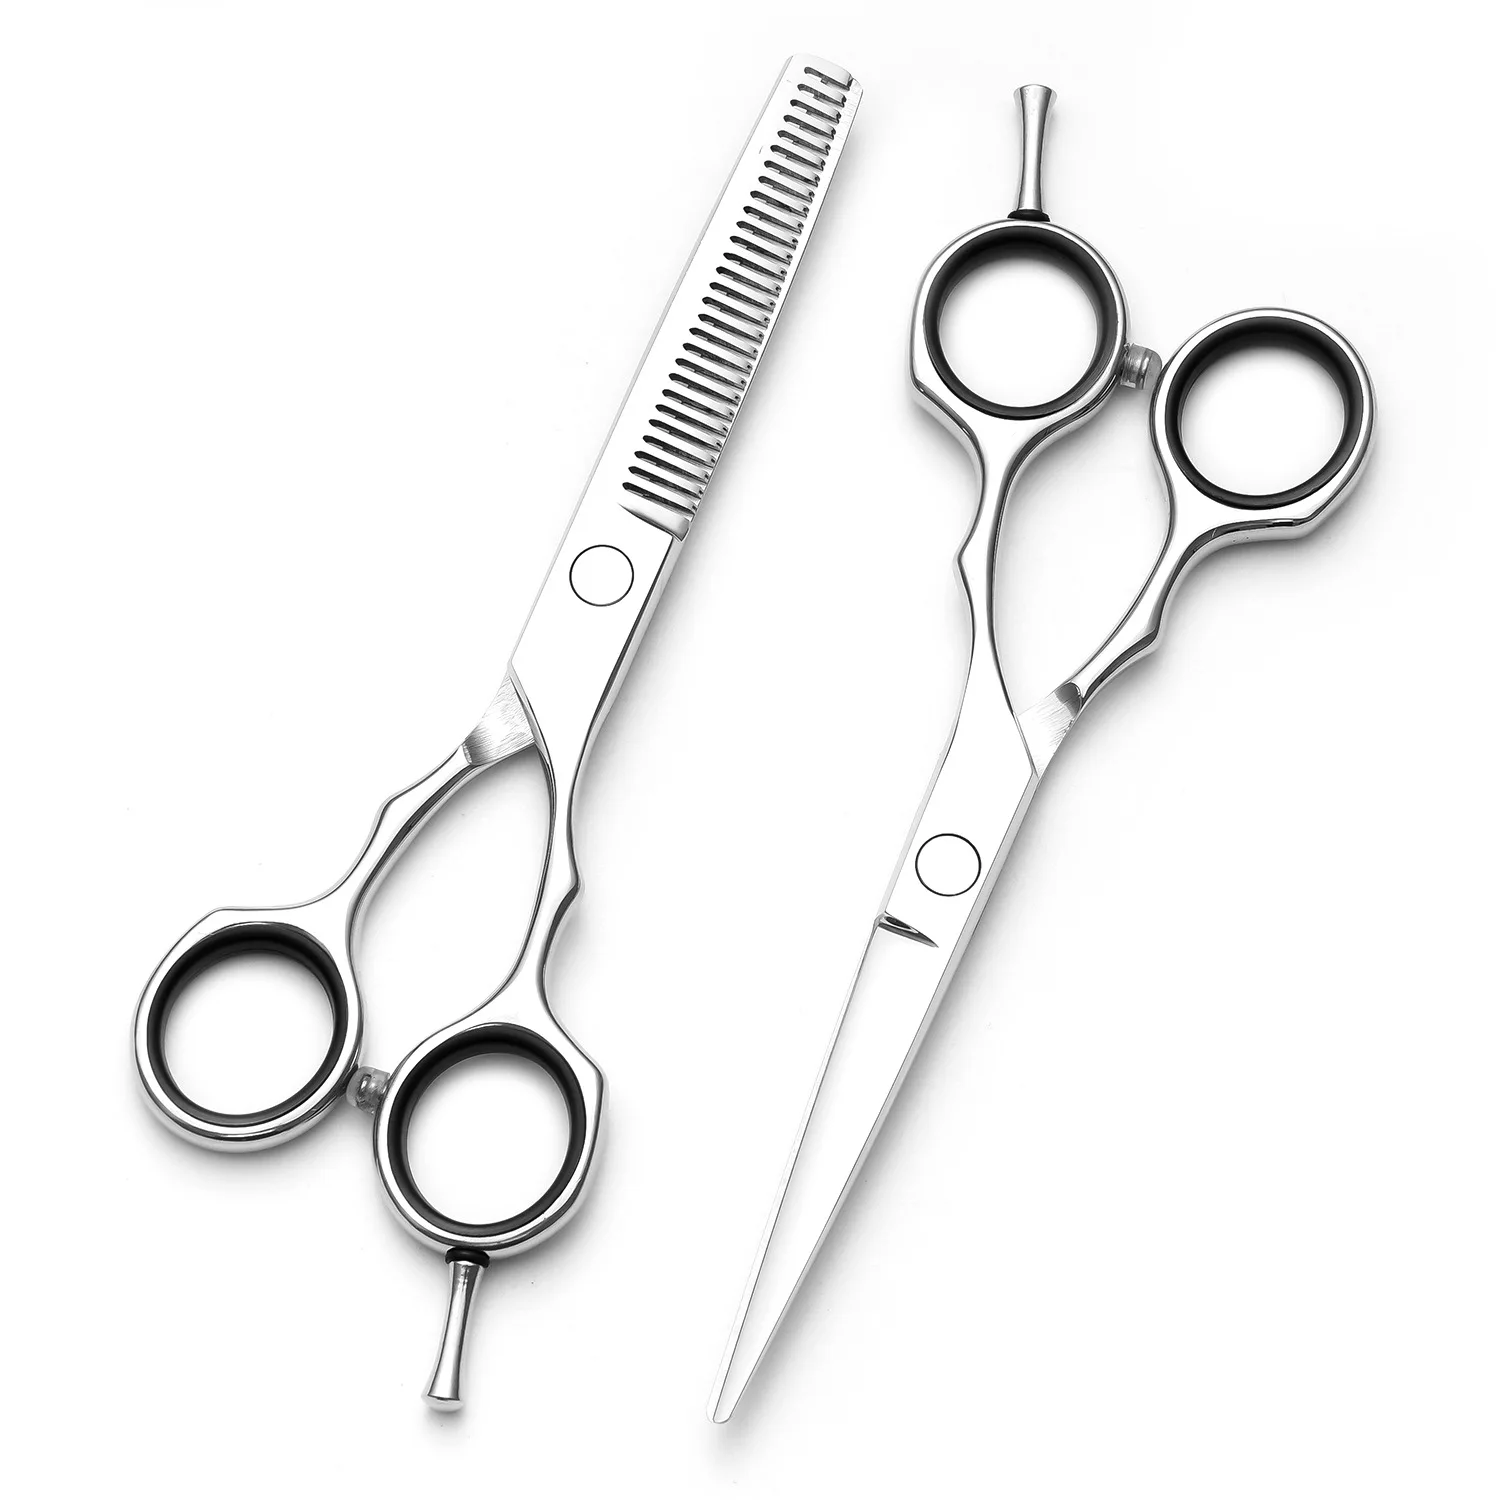 5.5 inch hairdressing scissors professional flat cutting thinning hairstylist hairdressing set hair cutting scissors the new 7 inch 40pin 1024x600 coding digital fpc y83476 v02 flat liquid crystal display screen fpc y83476 v03